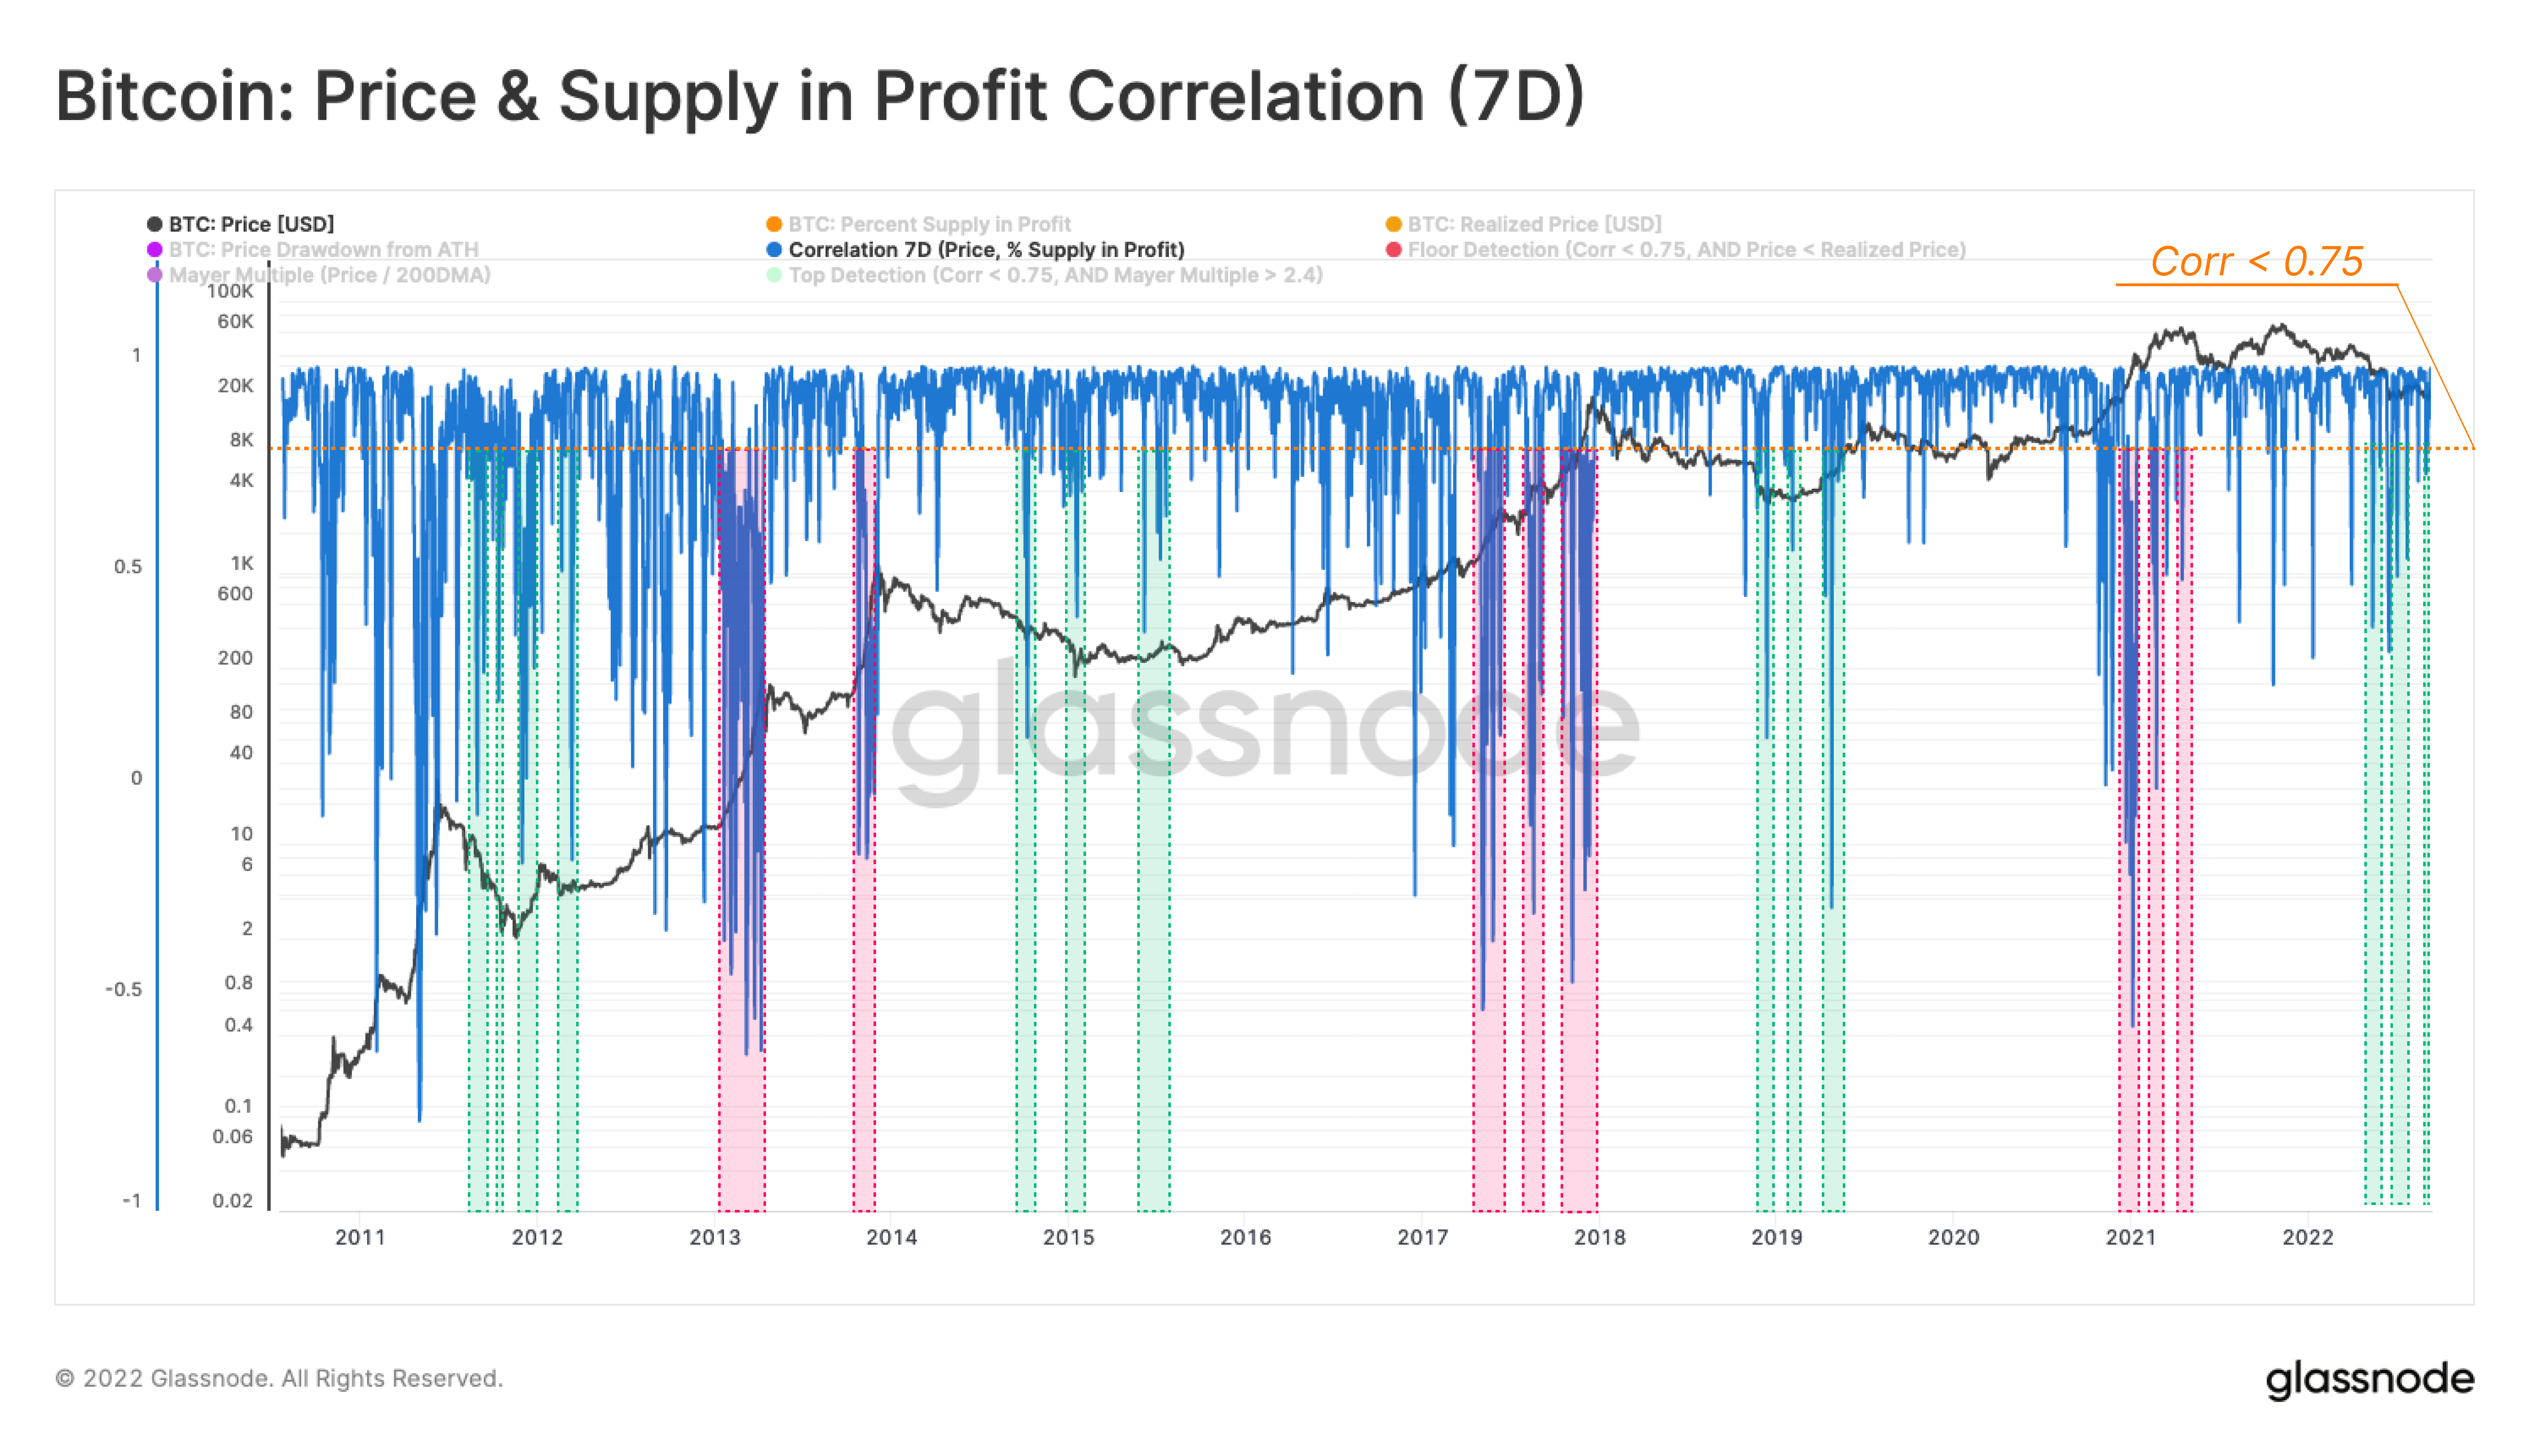 Bitcoin price and supply in relation to profits